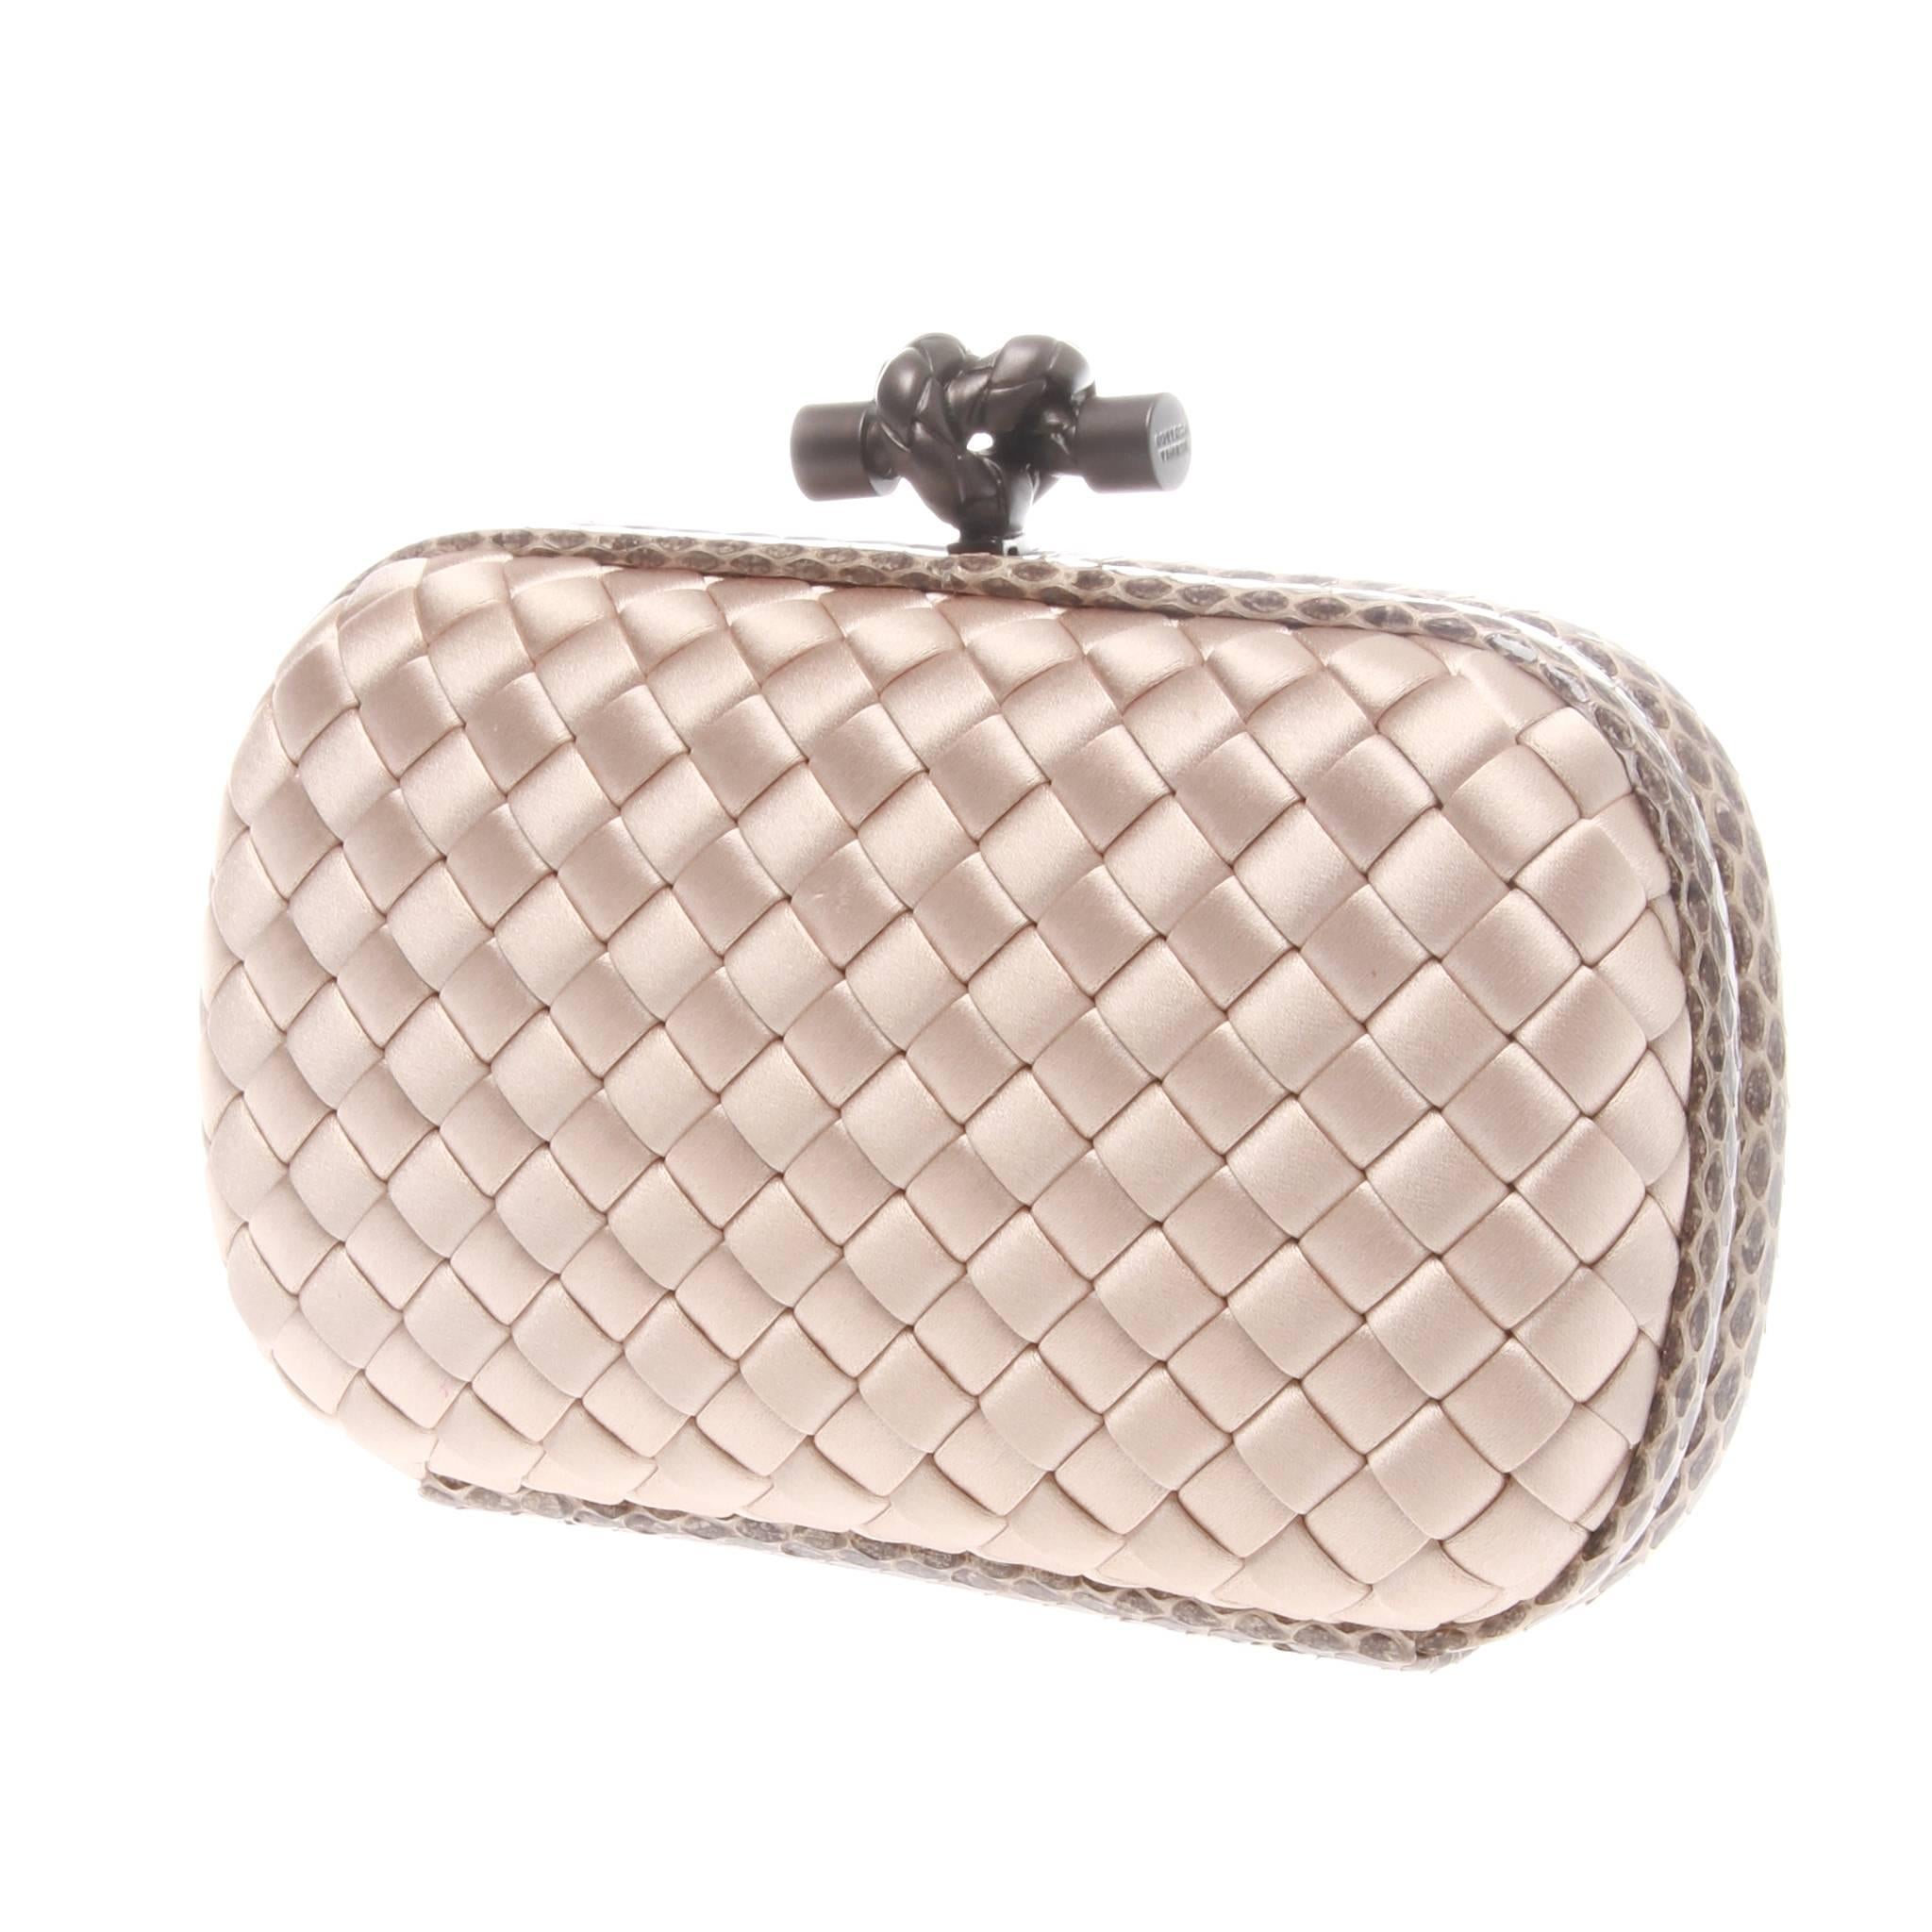 A exceptional beige clutch crafted in BOTTEGA VENETA Watersnake-trimmed Intrecciato Satin style that will hold its own against any glamorous evening look.
Blush pink intrecciato woven satin body.
Taupe matte hardware.
Hard-shell body closes with